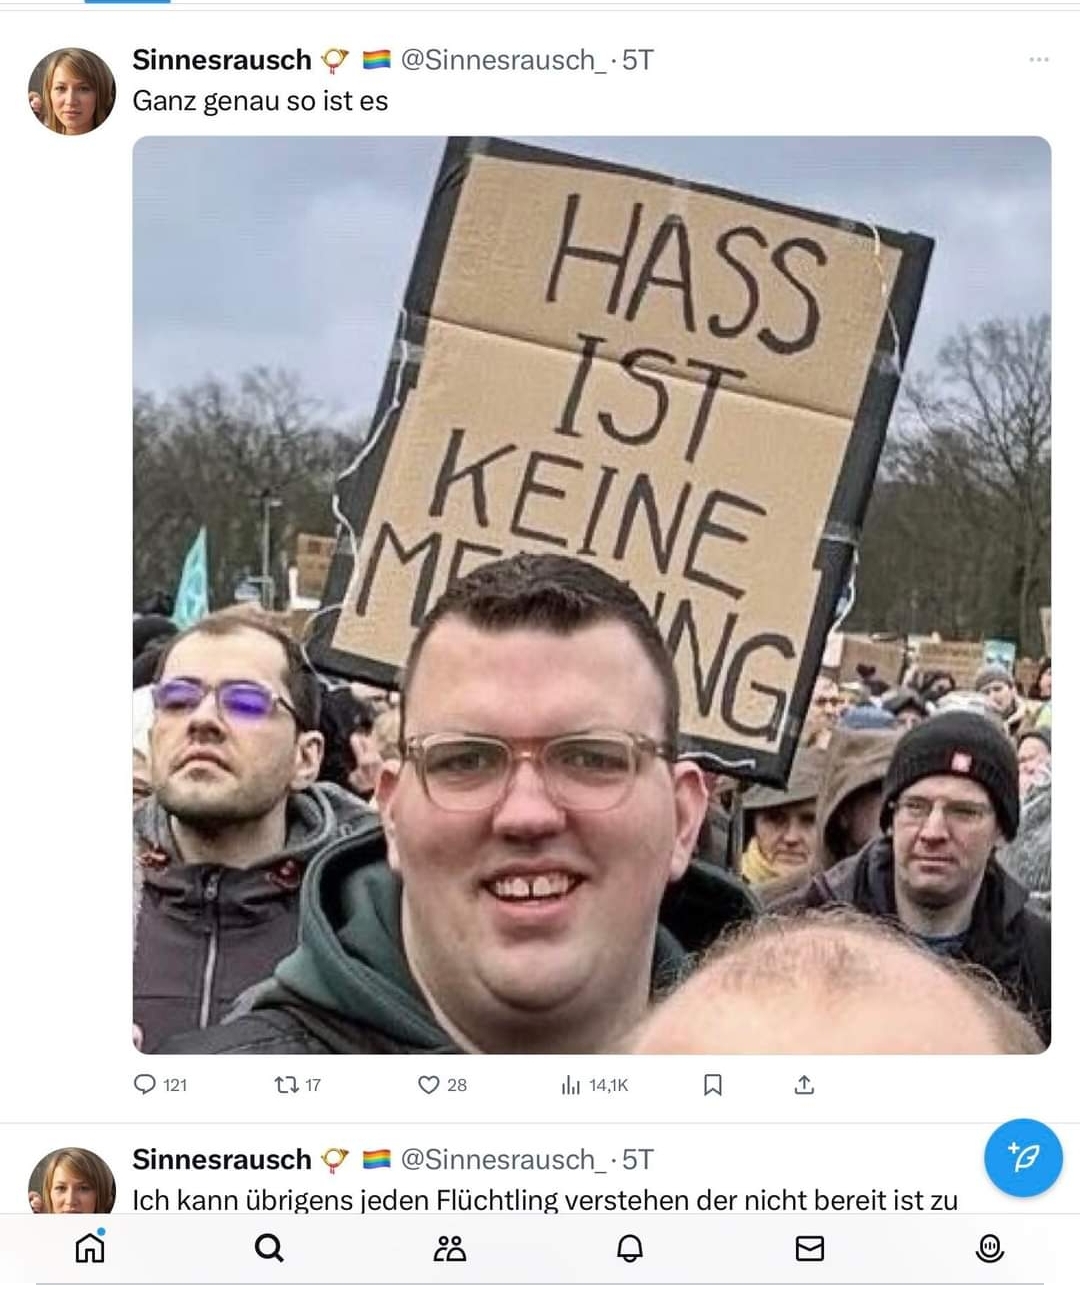 Hass ist k1 Meinung...